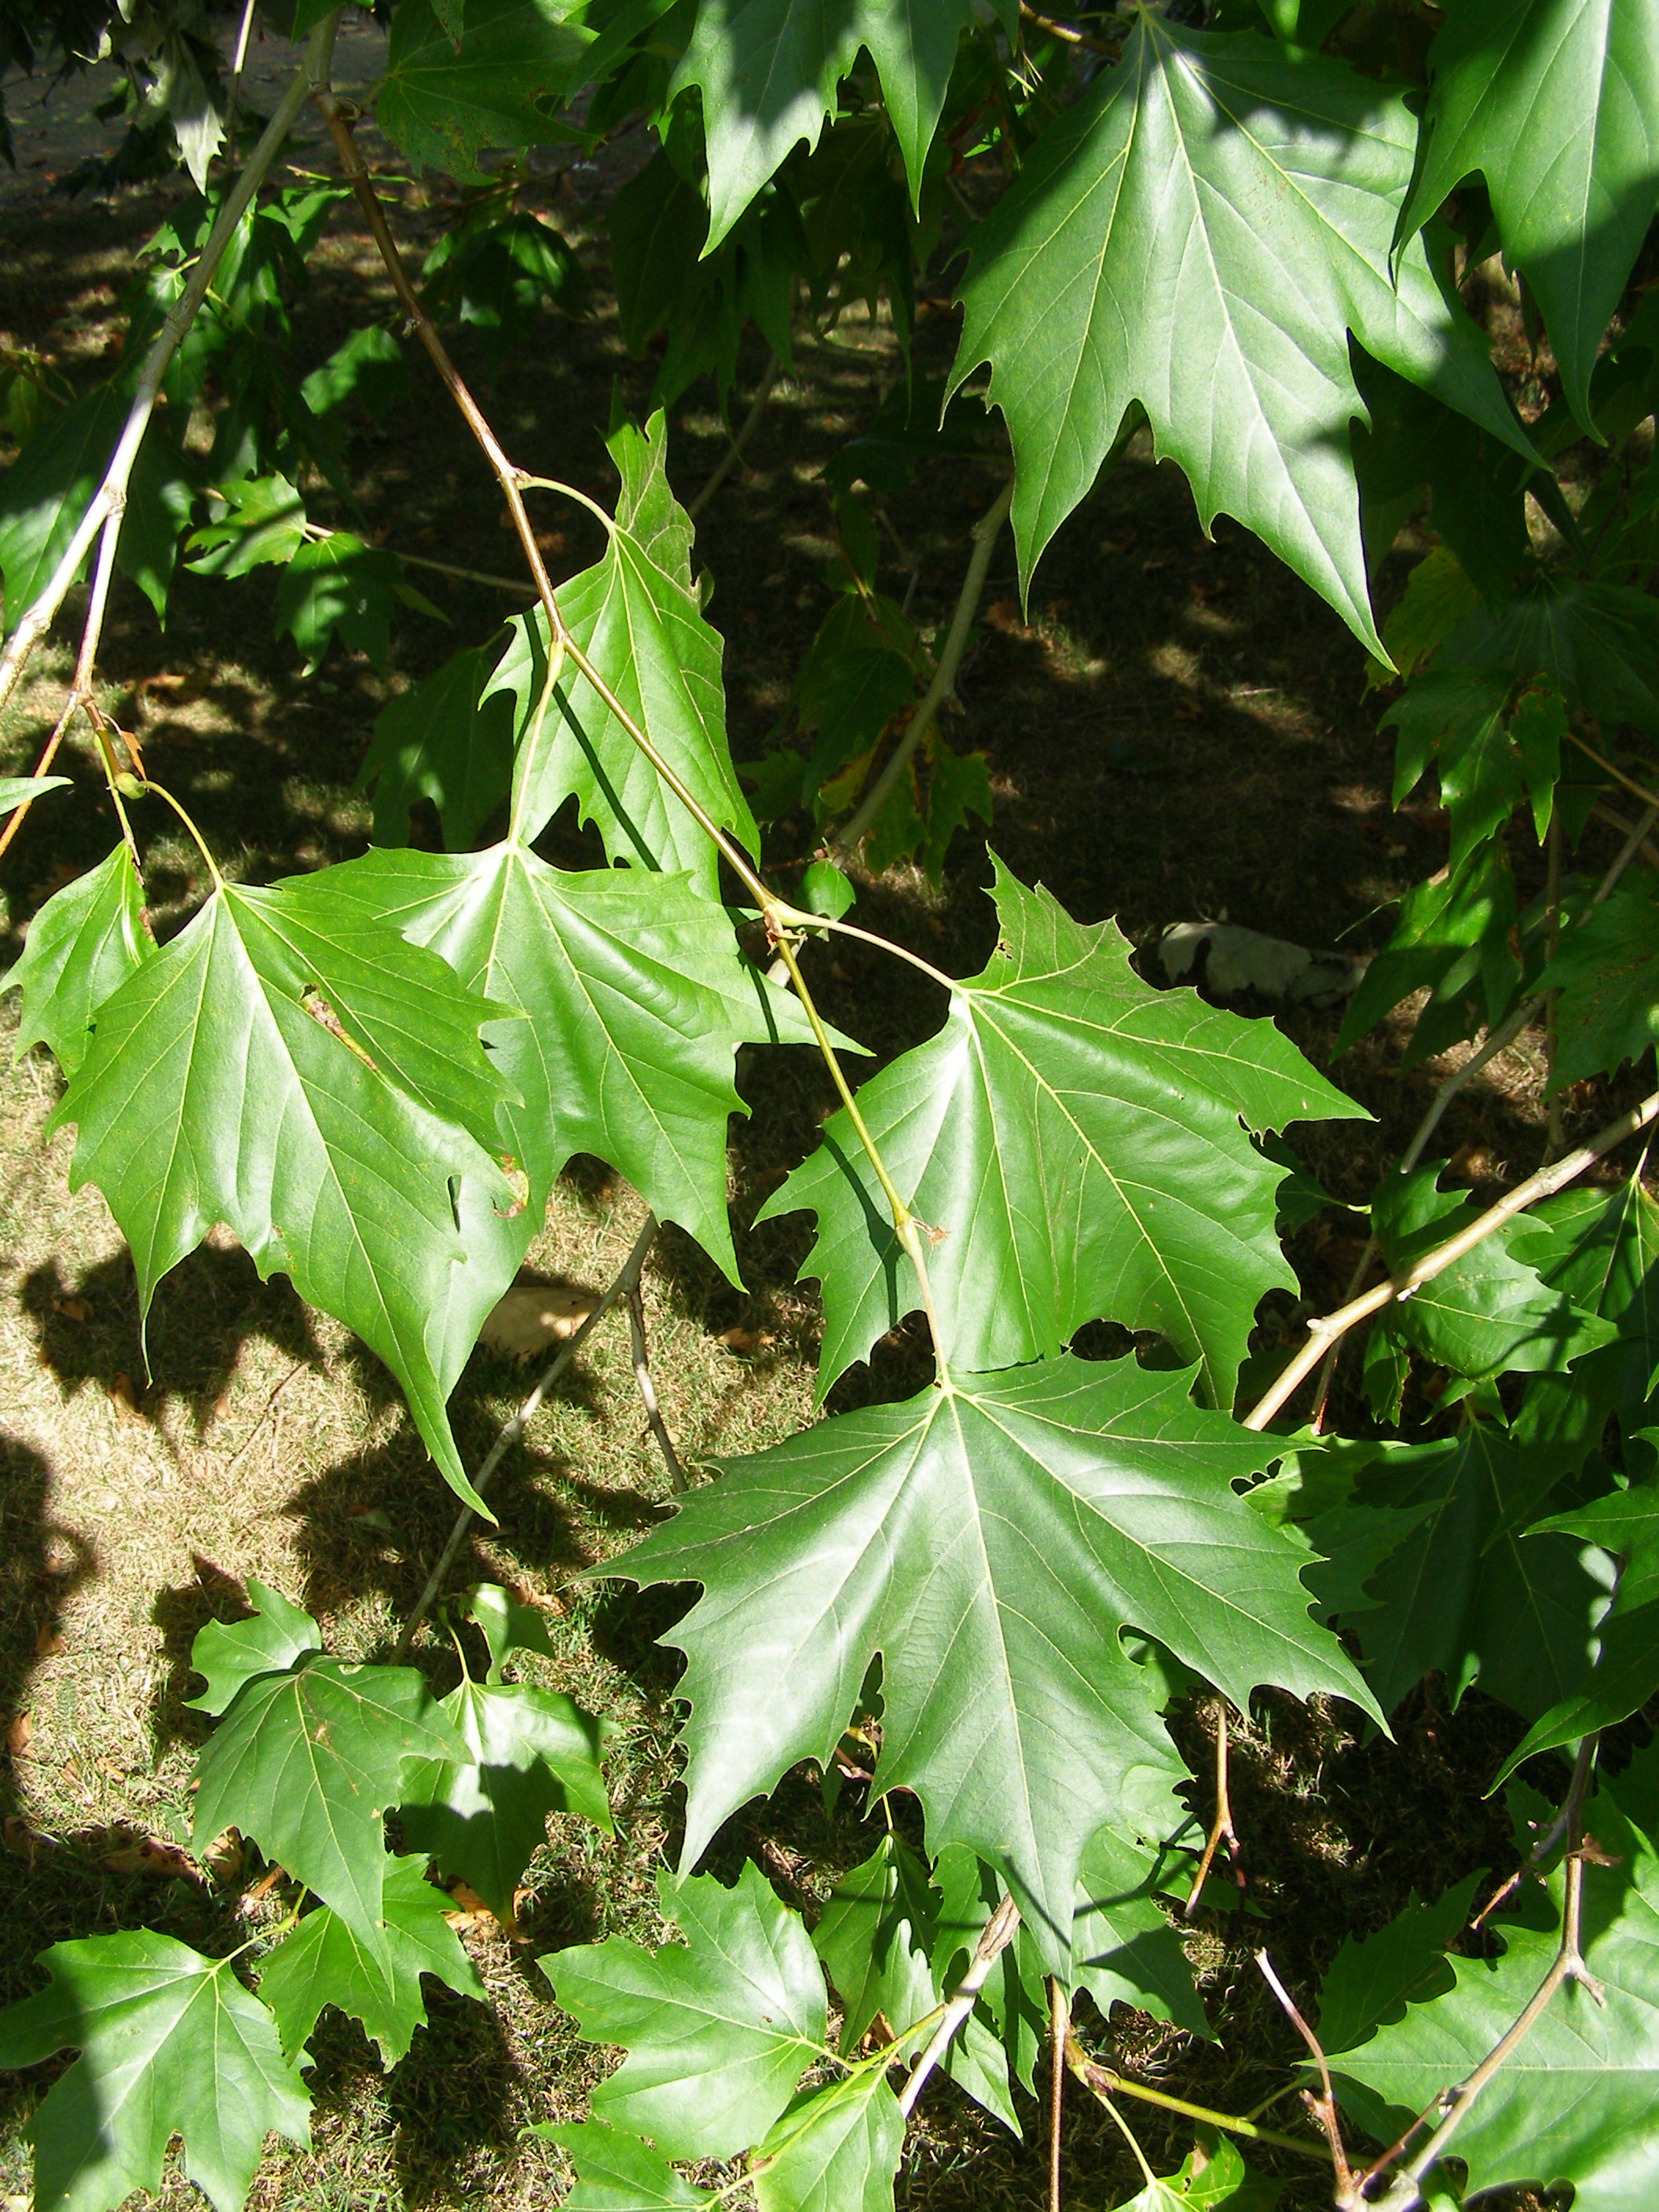 Leafy shoot in late summer